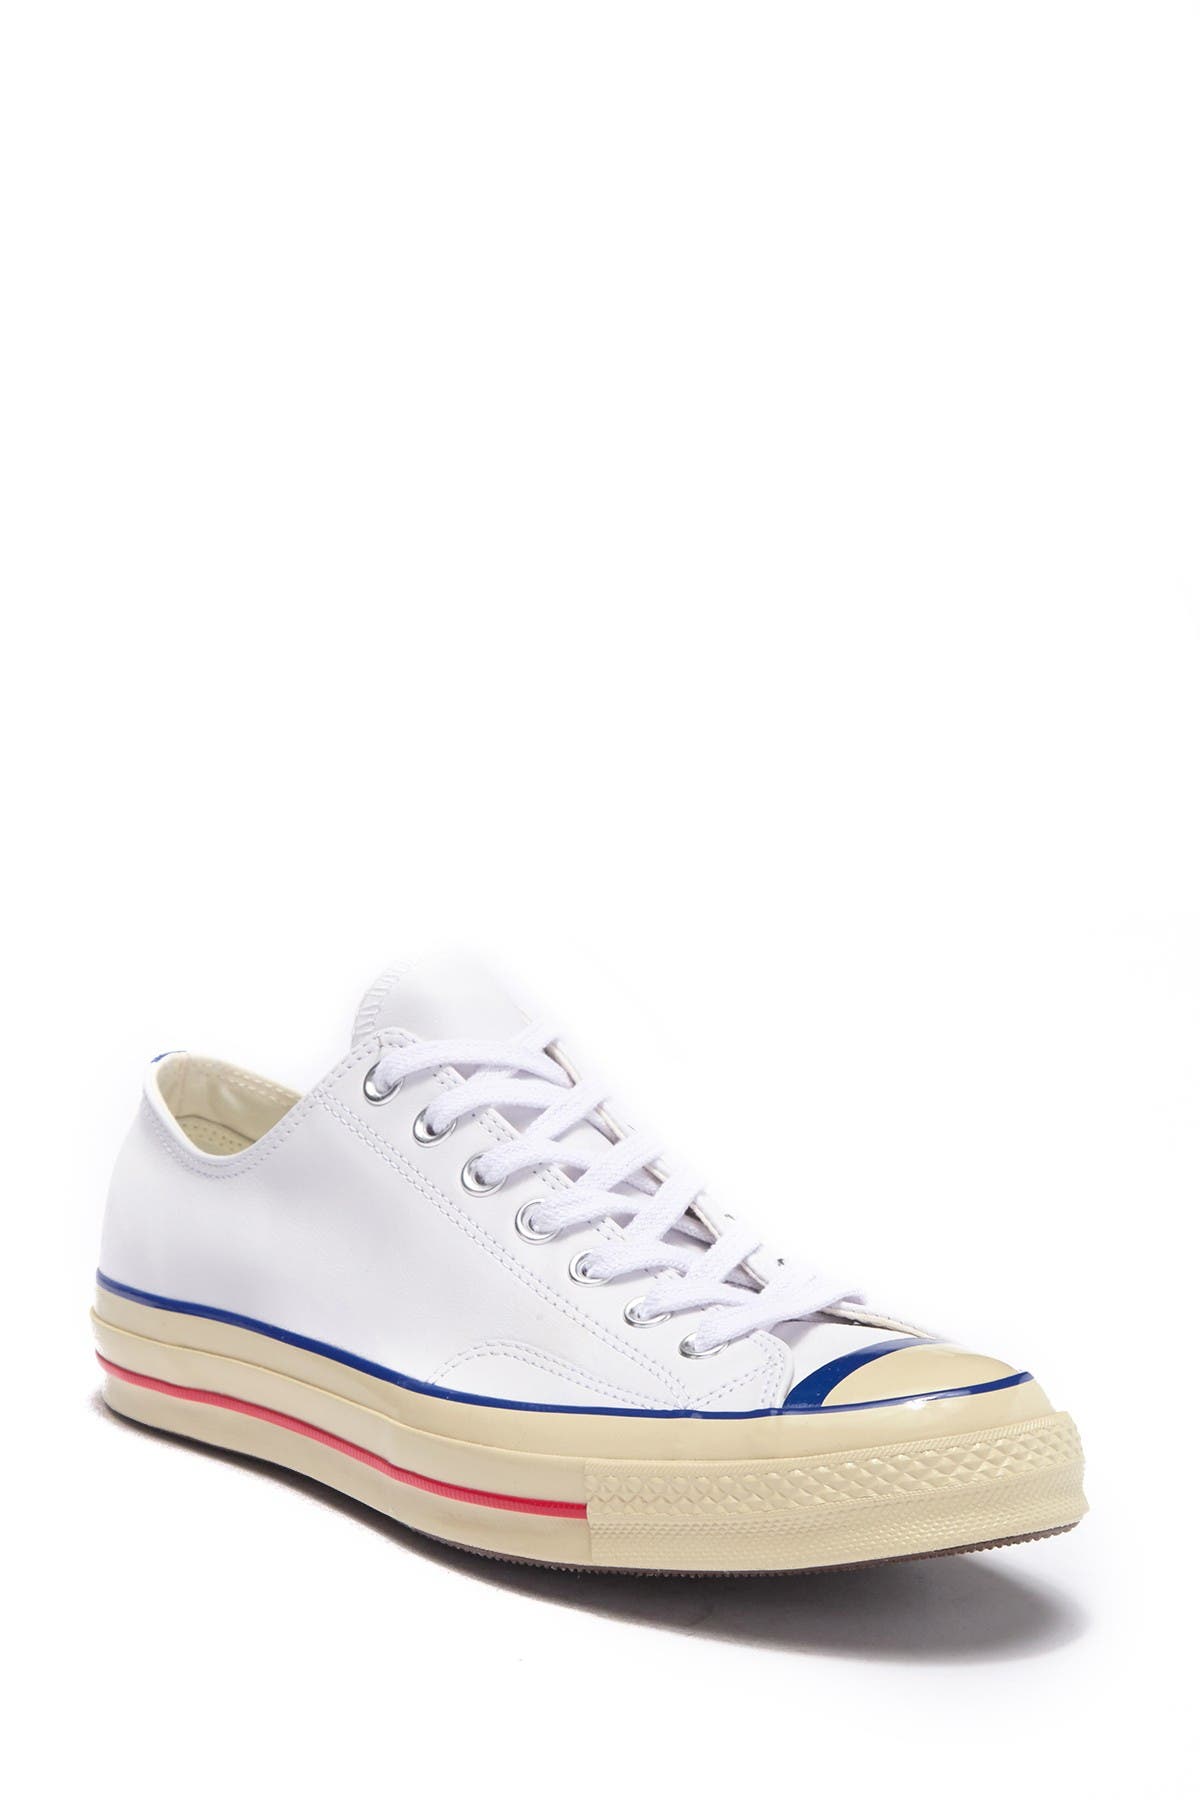 Converse | Chuck 70 Ox Leather Sneaker 